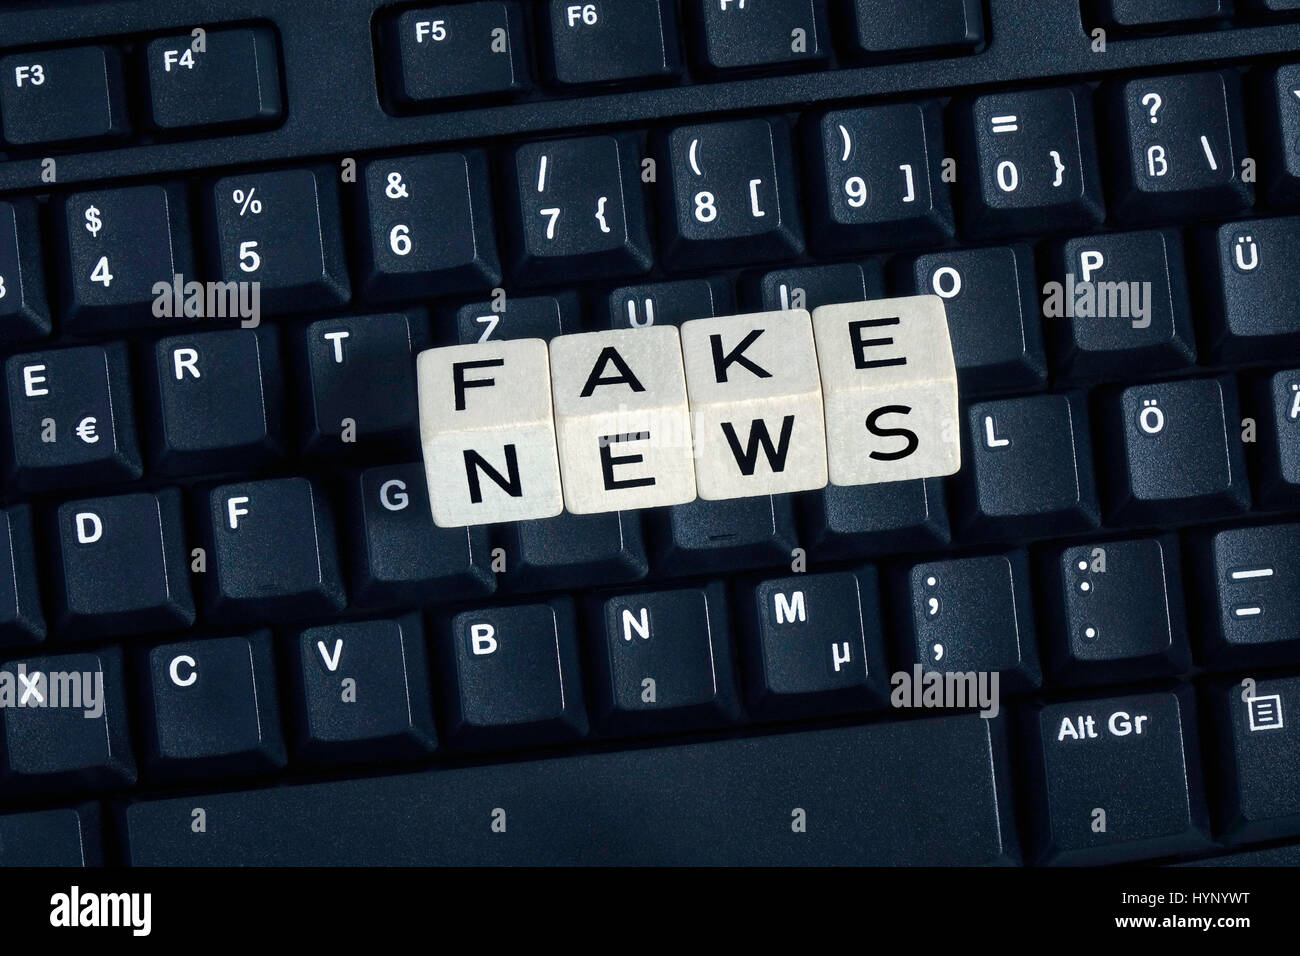 ILLUSTRATION - Four letter-dice spell out the words 'Fake News' on a computer keyboard. Taken on 18.12.2016. 'Fake News' refers to false and incorrect information, often spread on purpose via electronic channels (mainly social media). They are deliberately spread by journalists, office-holders, politicians, companies and private individuals. In the German language, the word 'fake' has no exact cognate, and the English word is increasingly used by internet users and as a result has developed an association with internet culture and online jargon. These days fake news stories (untrue information Stock Photo